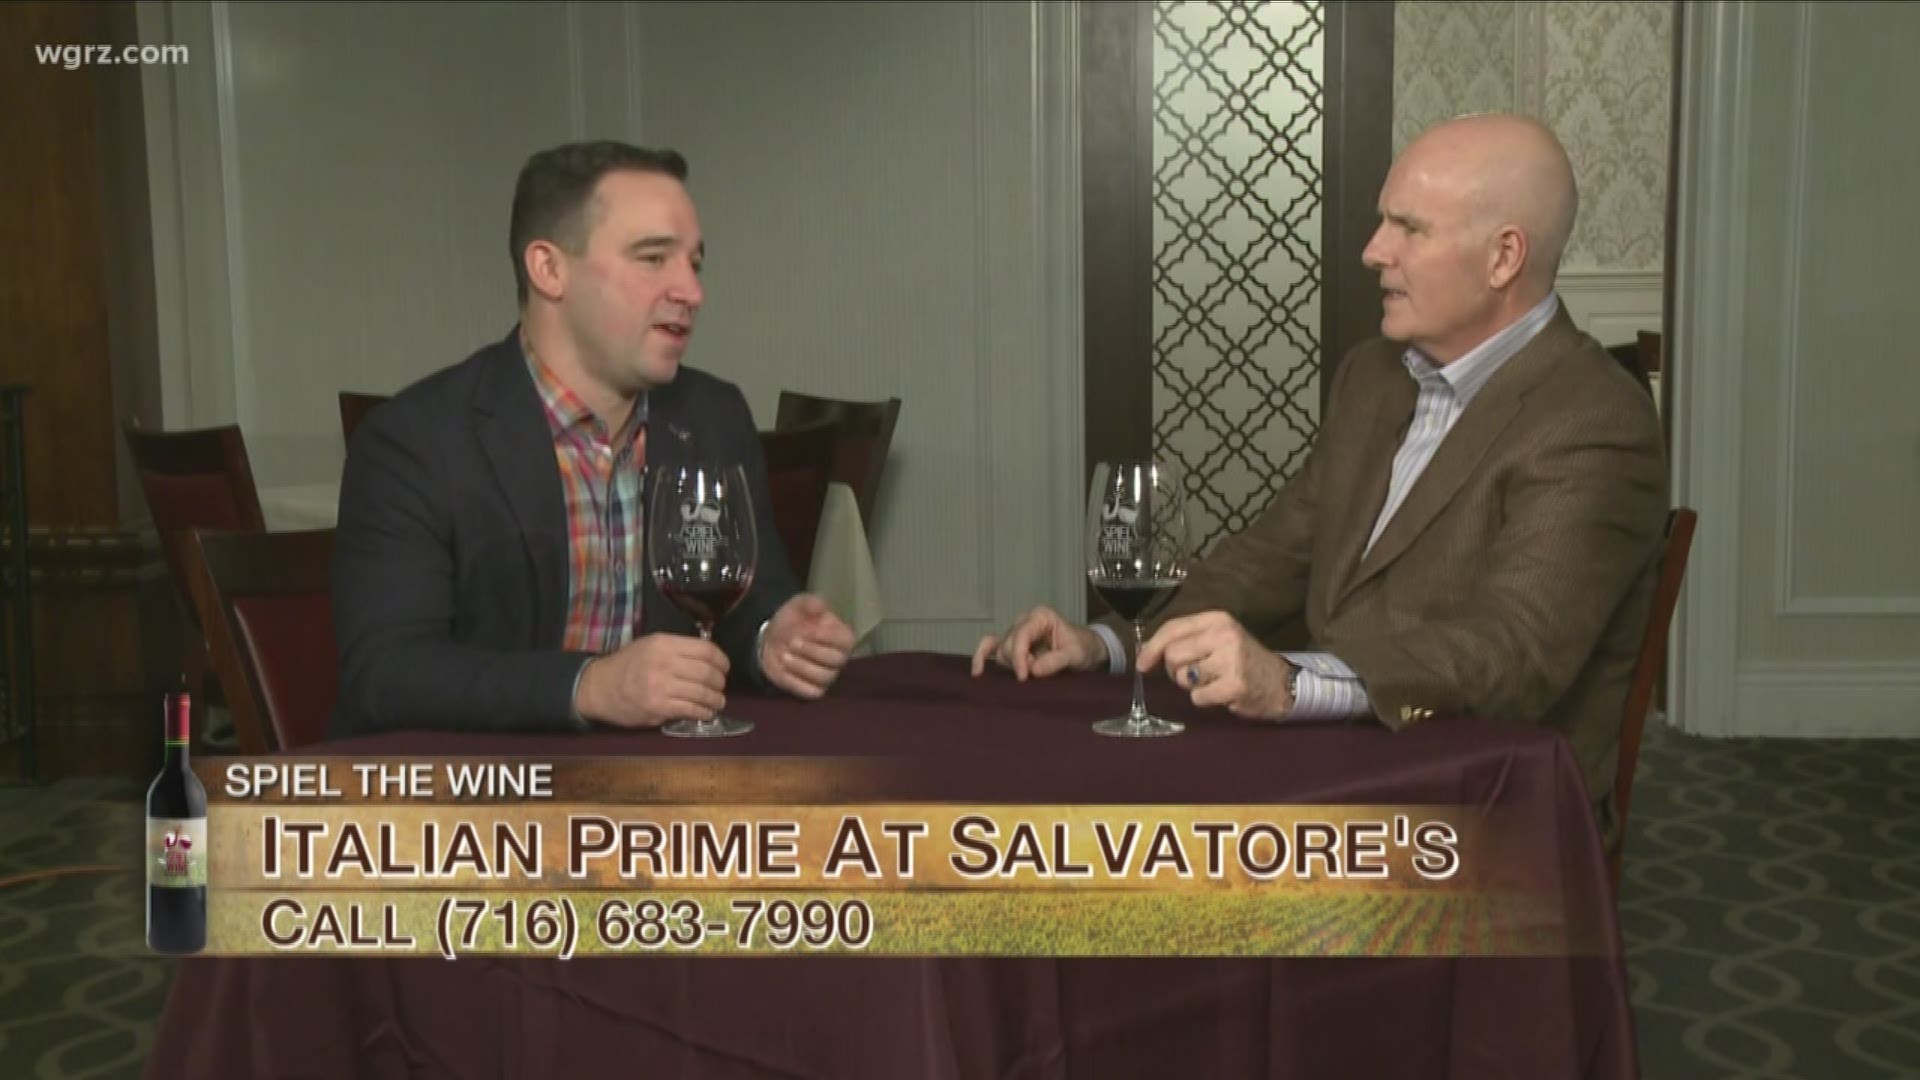 Spiel The Wine - November 30 - Segment 1 (THIS VIDEO IS SPONSORED BY ITALIAN PRIME AT SALVATORE'S)